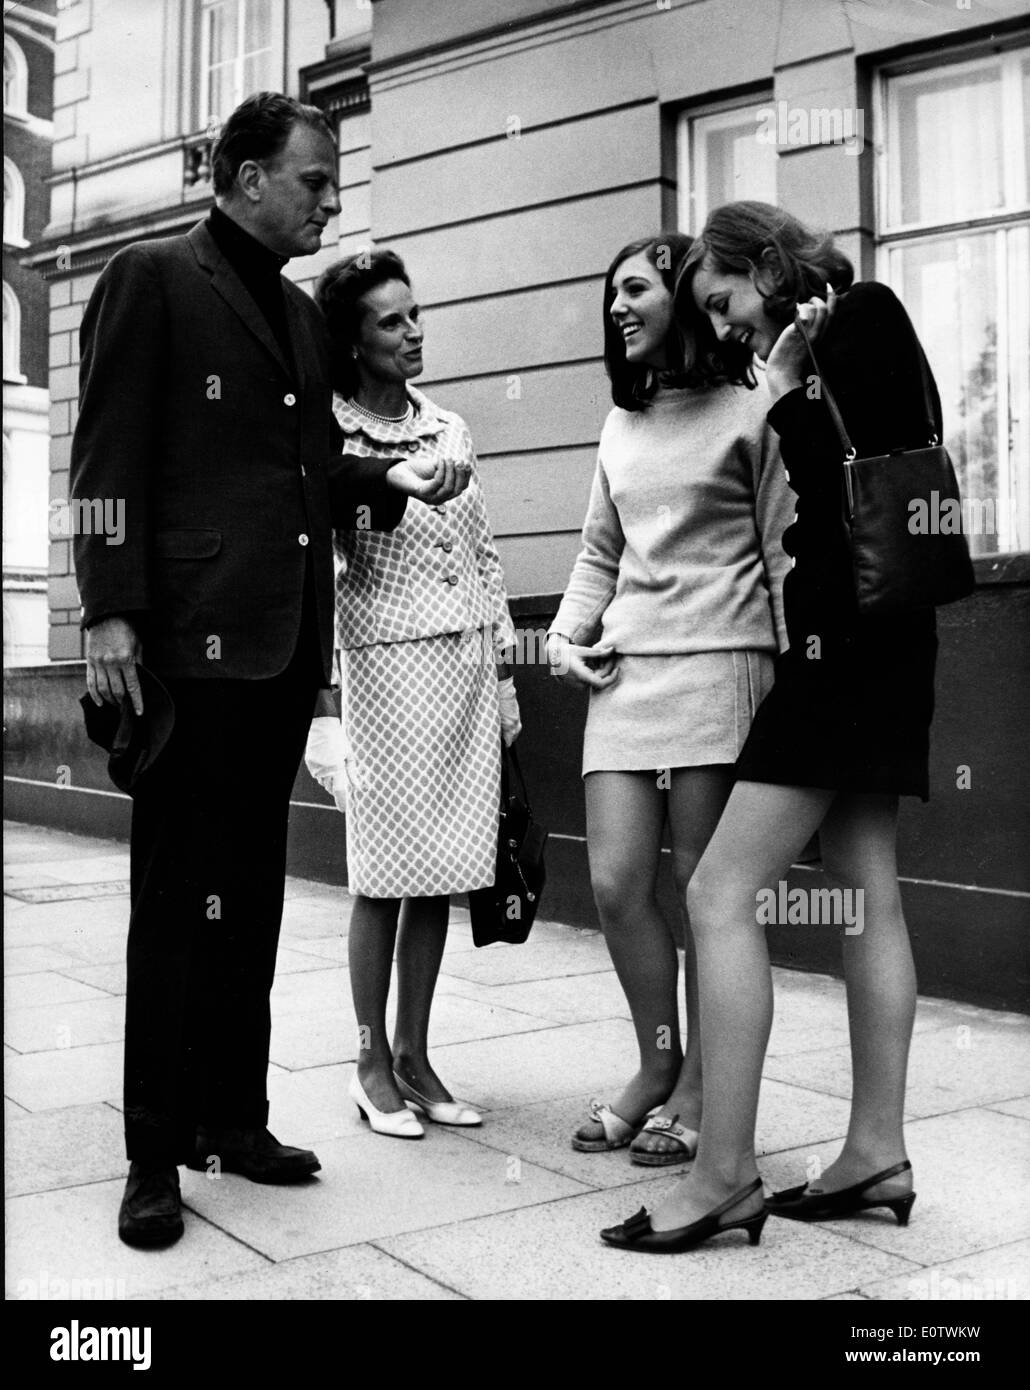 Reverend Billy Graham chats with ladies on sidewalk Stock Photo